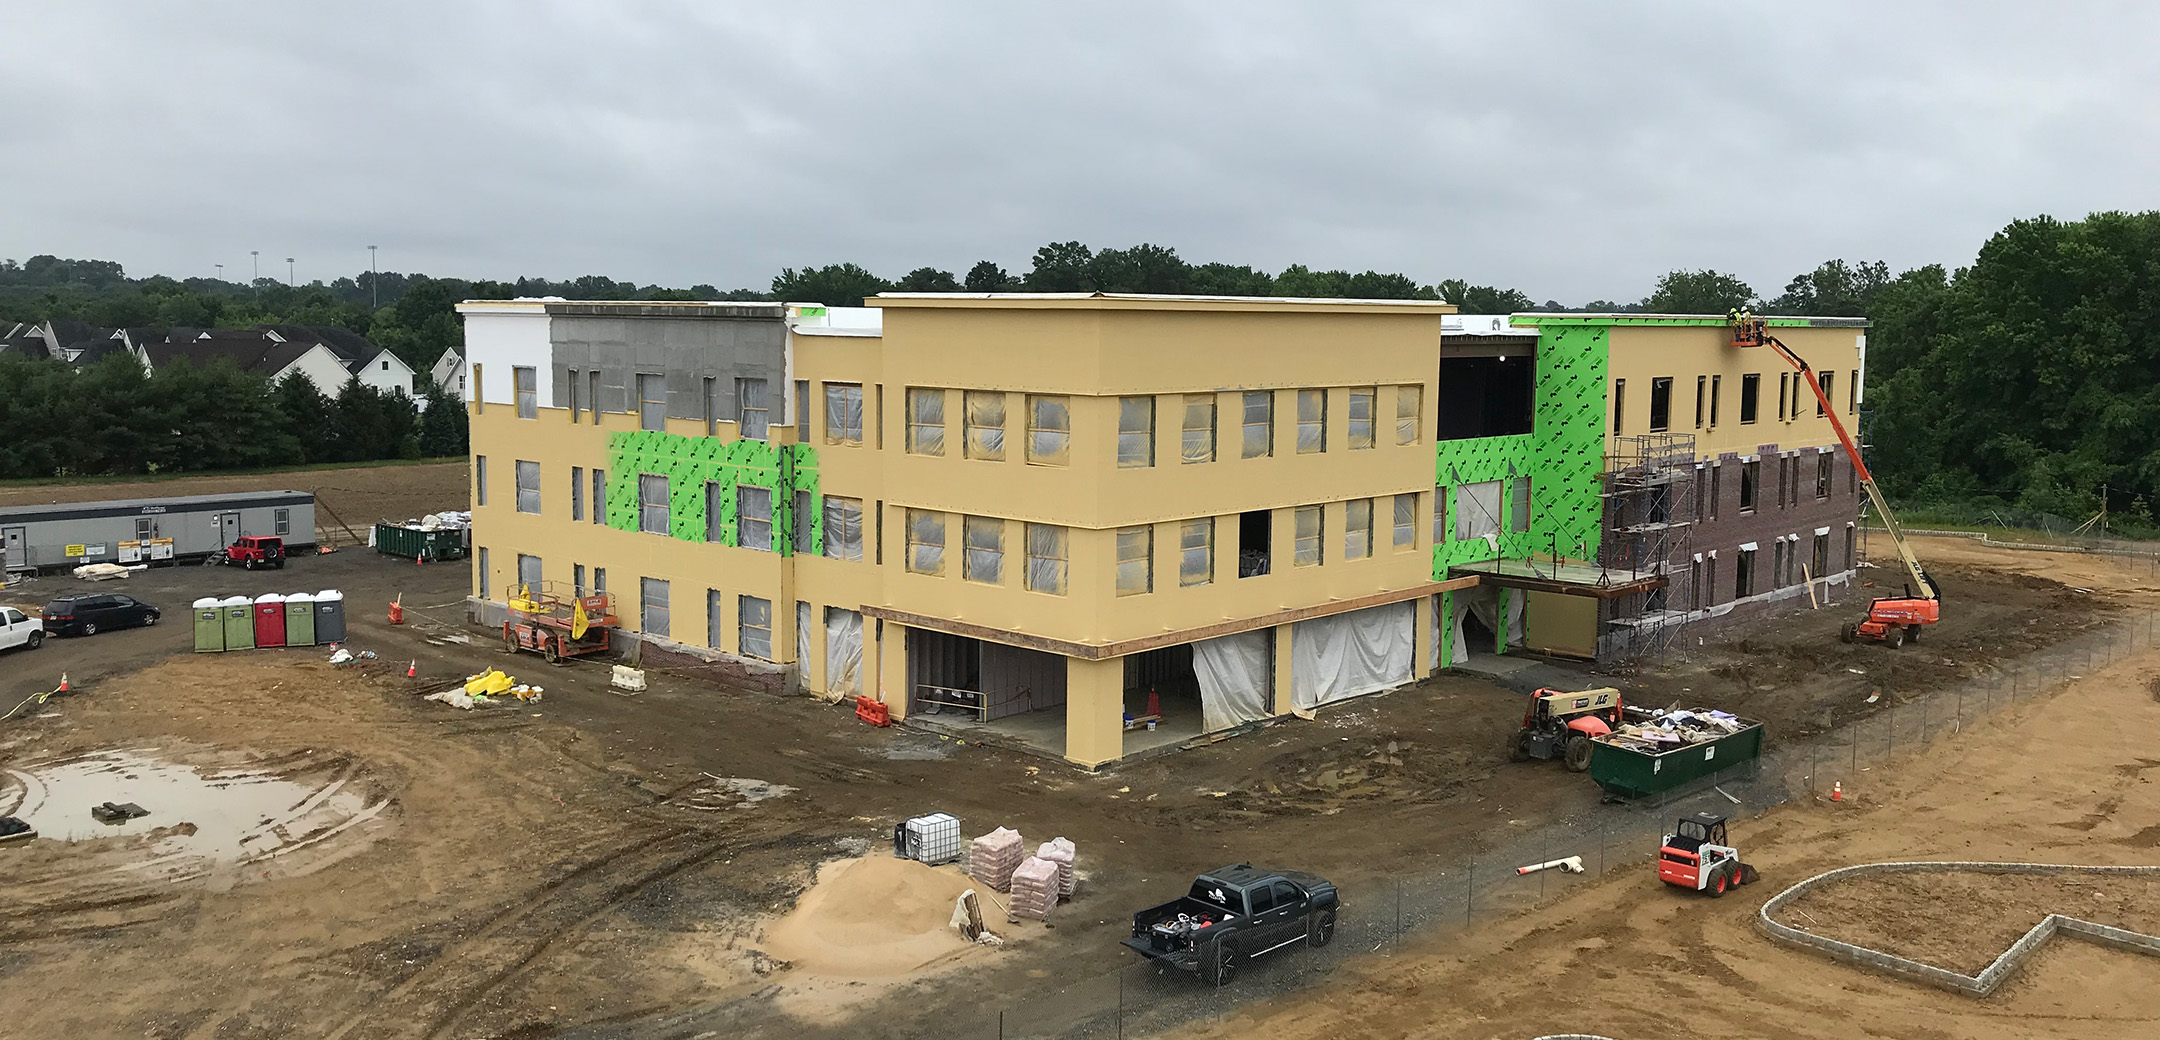 An angle view of Bordentown Medical Office Building with tan stucco exterior and many windows under construction.